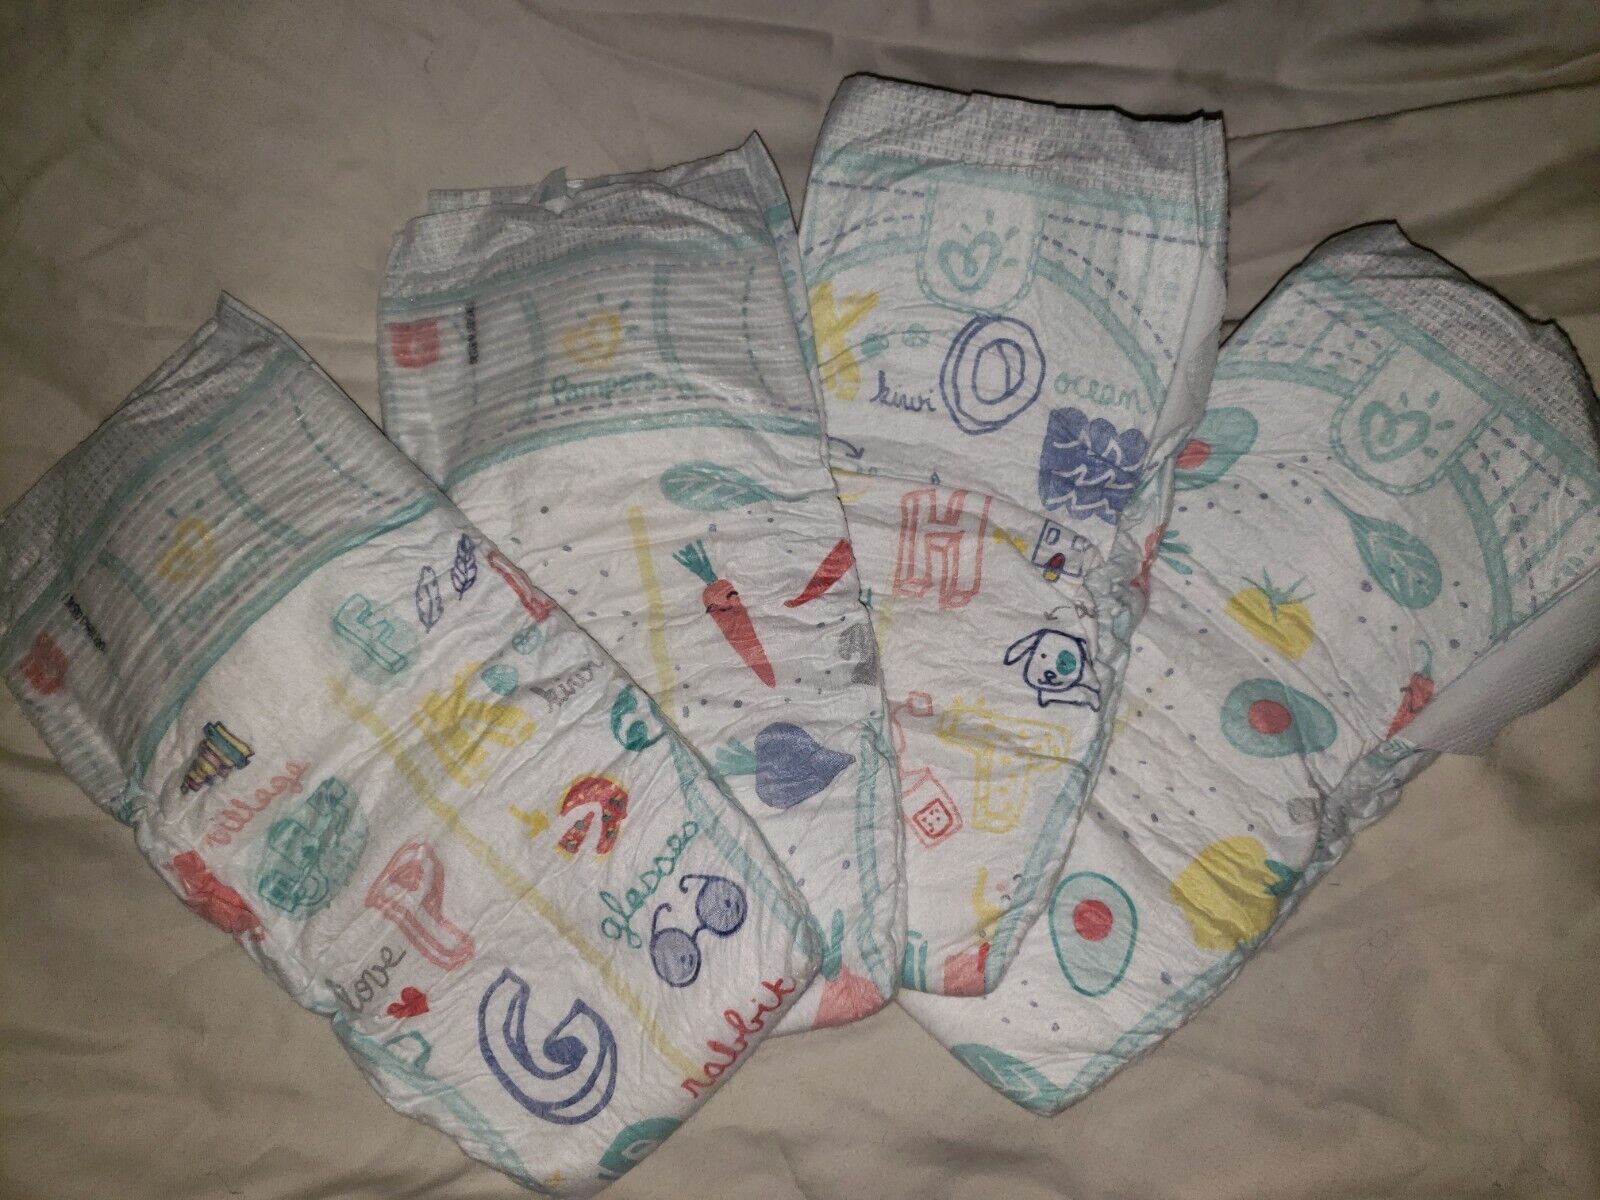 (4) Samples Of Pampers Cruises Diapers Size 6 Old Style (discontinued) 35 Lbs+